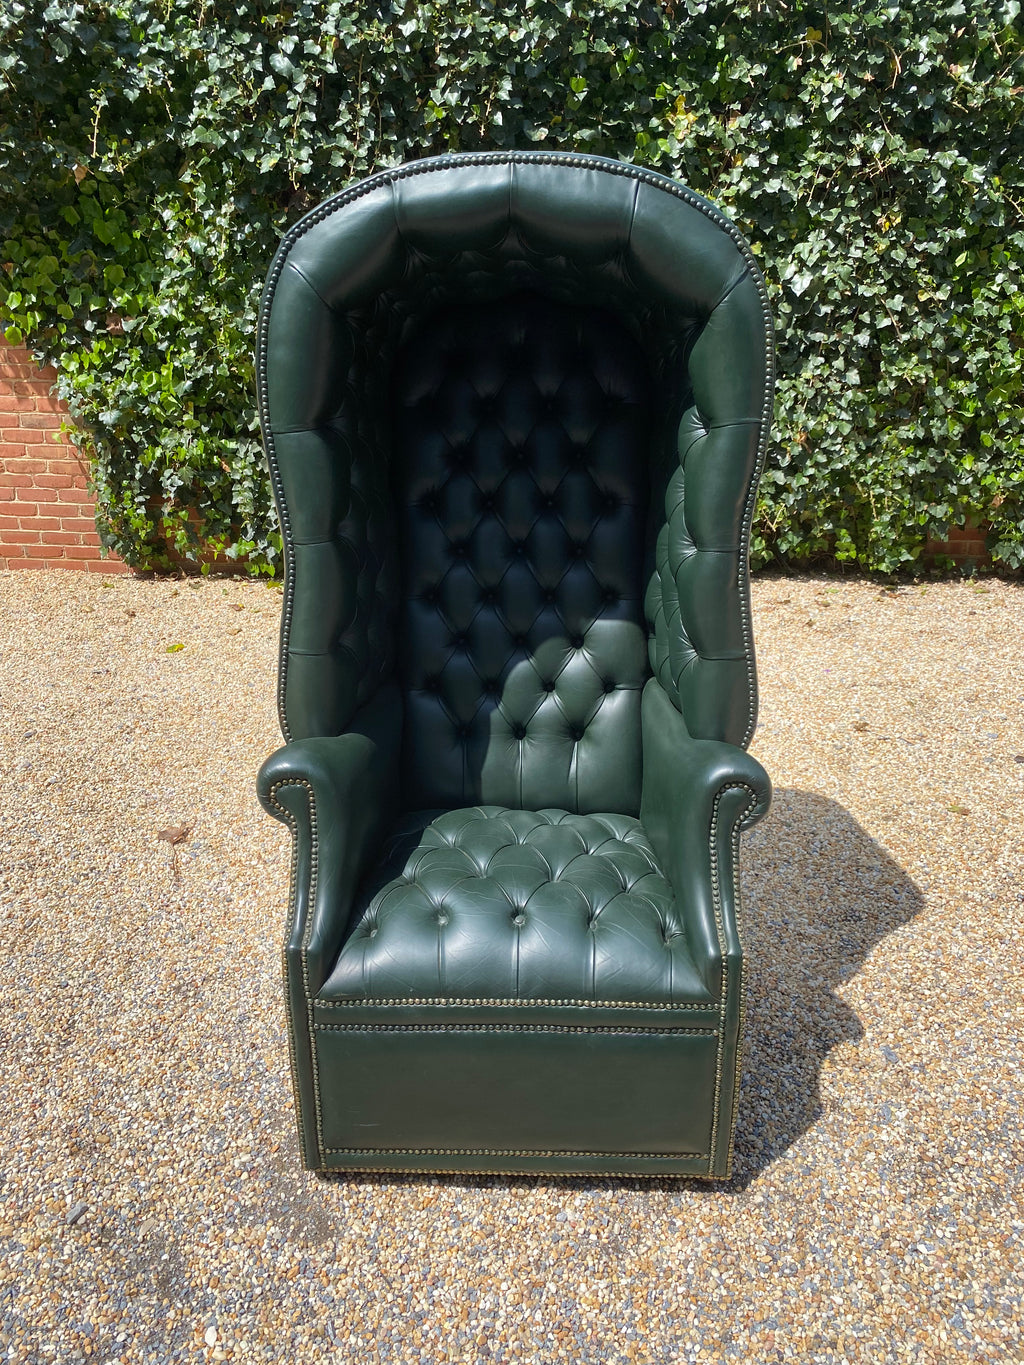 The Queen - Chesterfield Canopy Chair